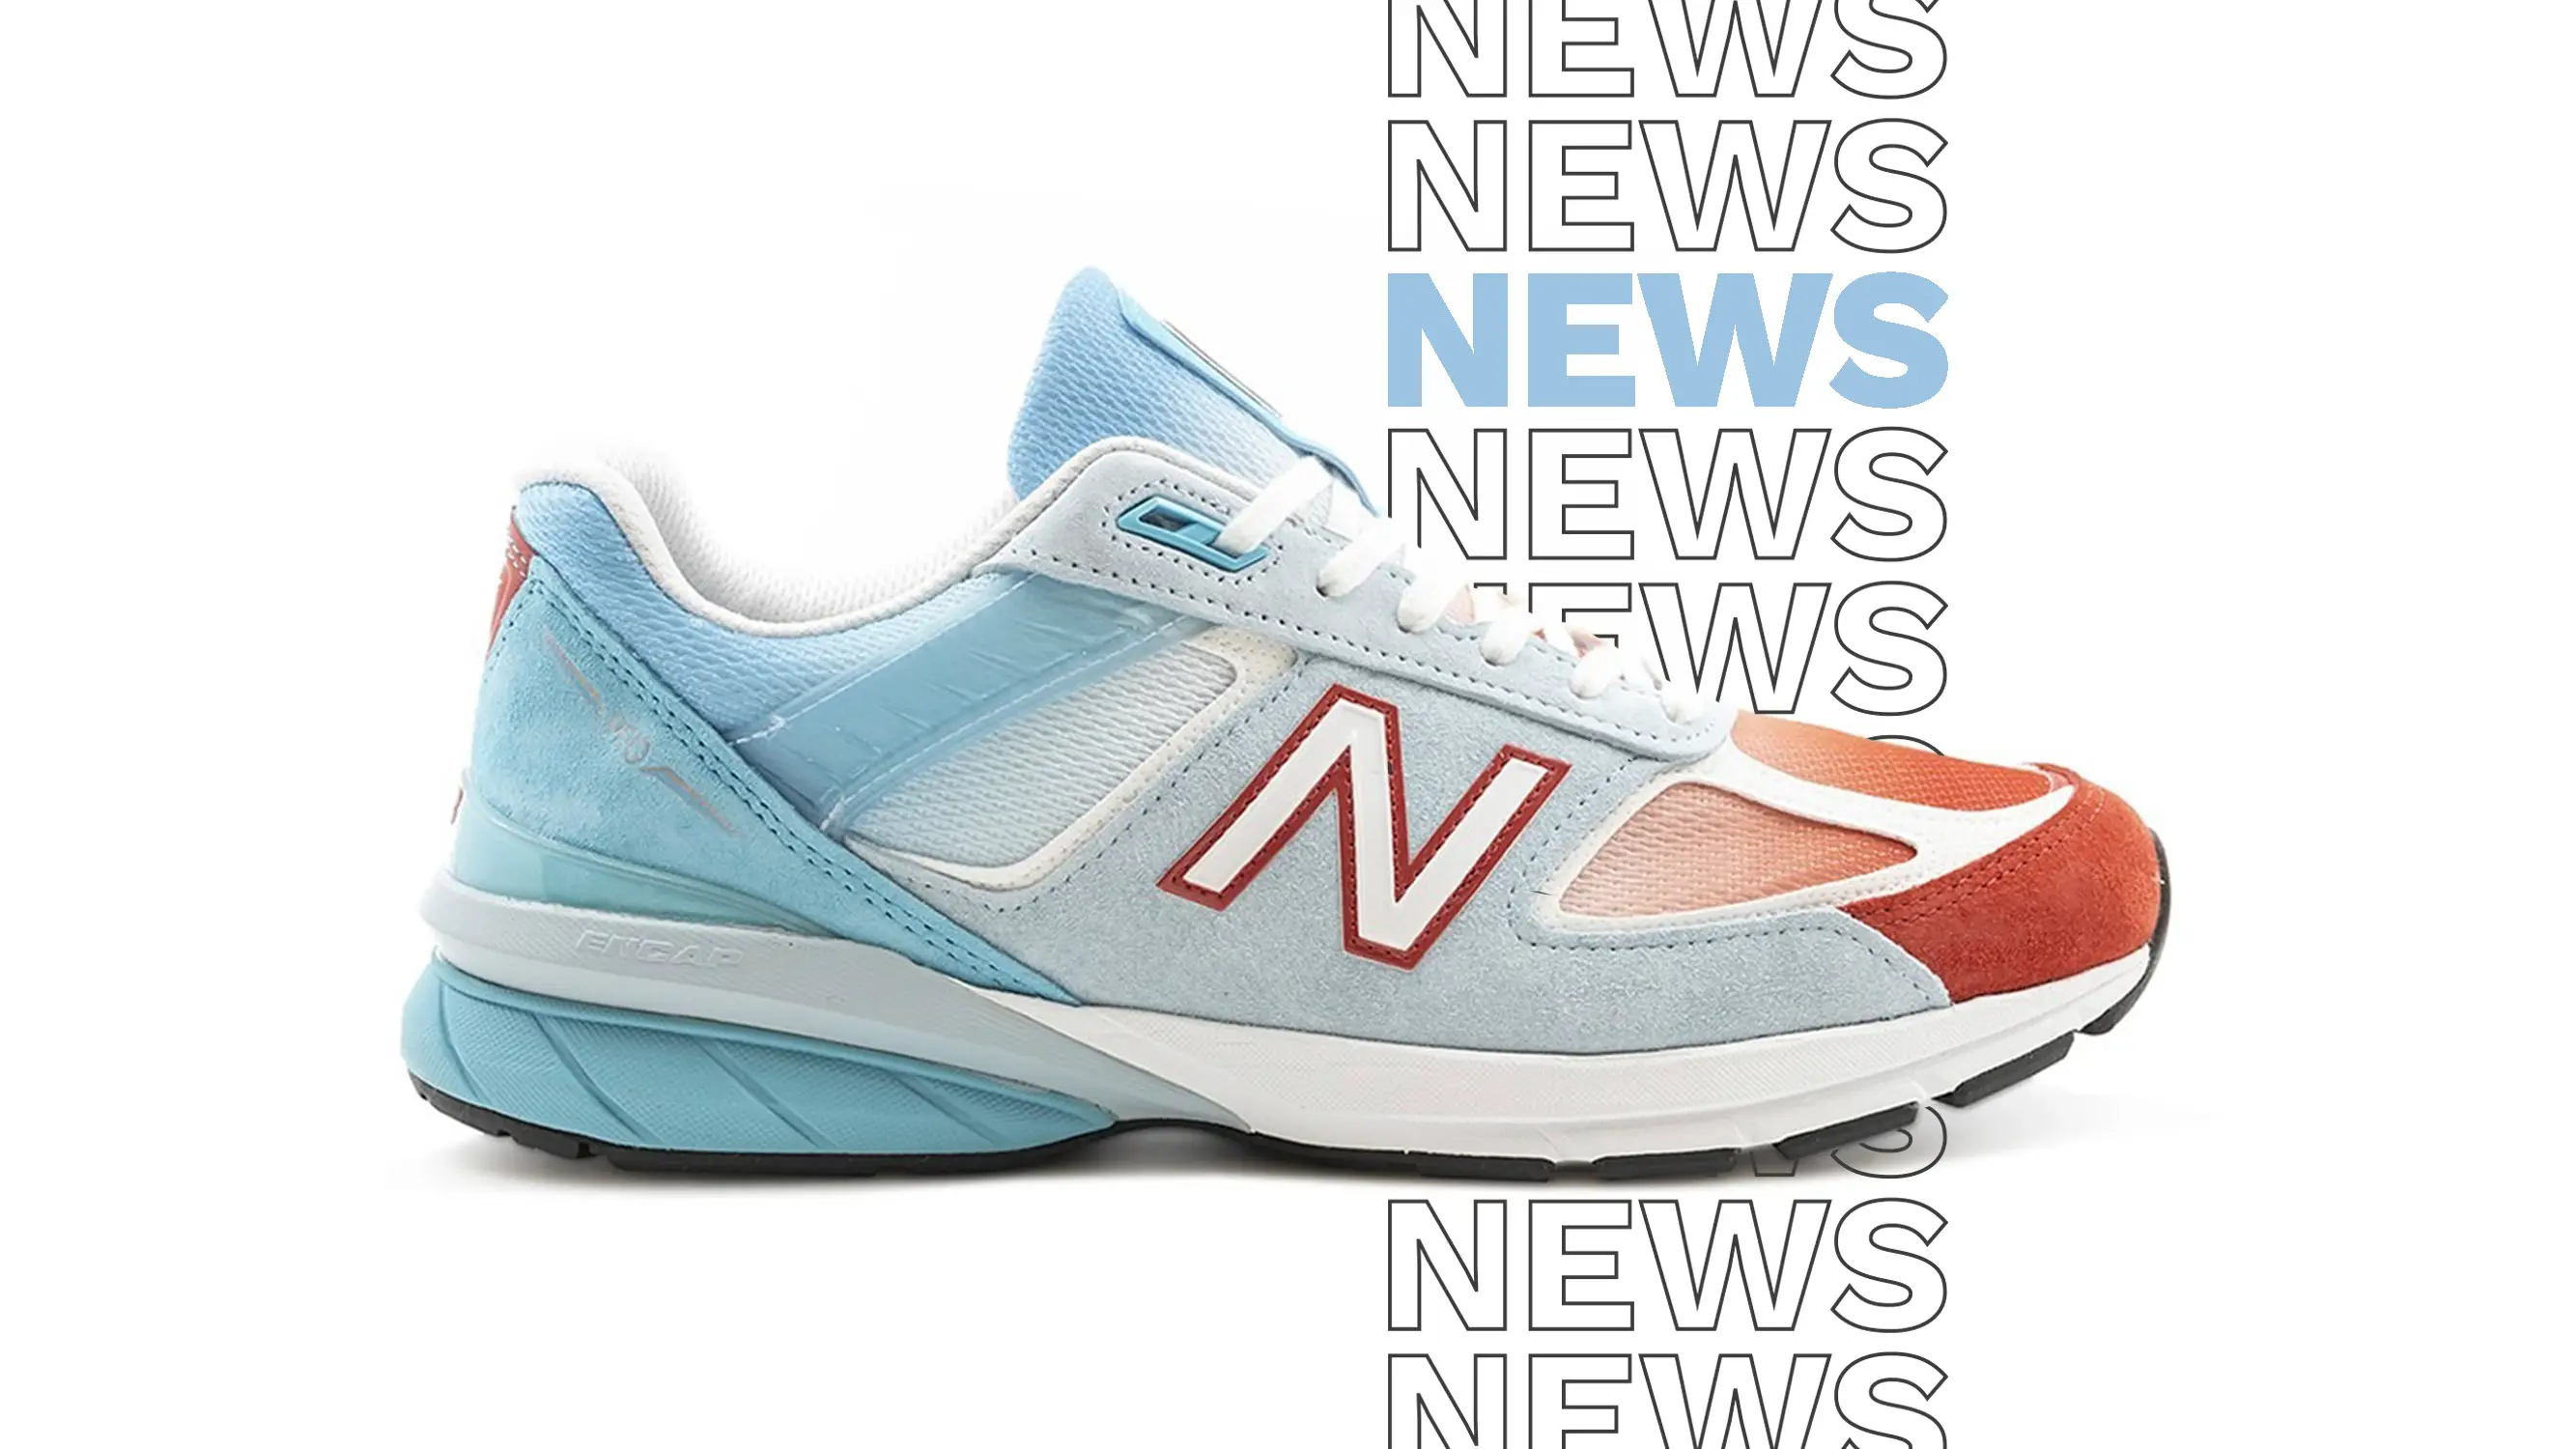 The New Balance 990v5 Popsicle Gets Dressed in a Summer-Ready Outfit |  The Sole Supplier